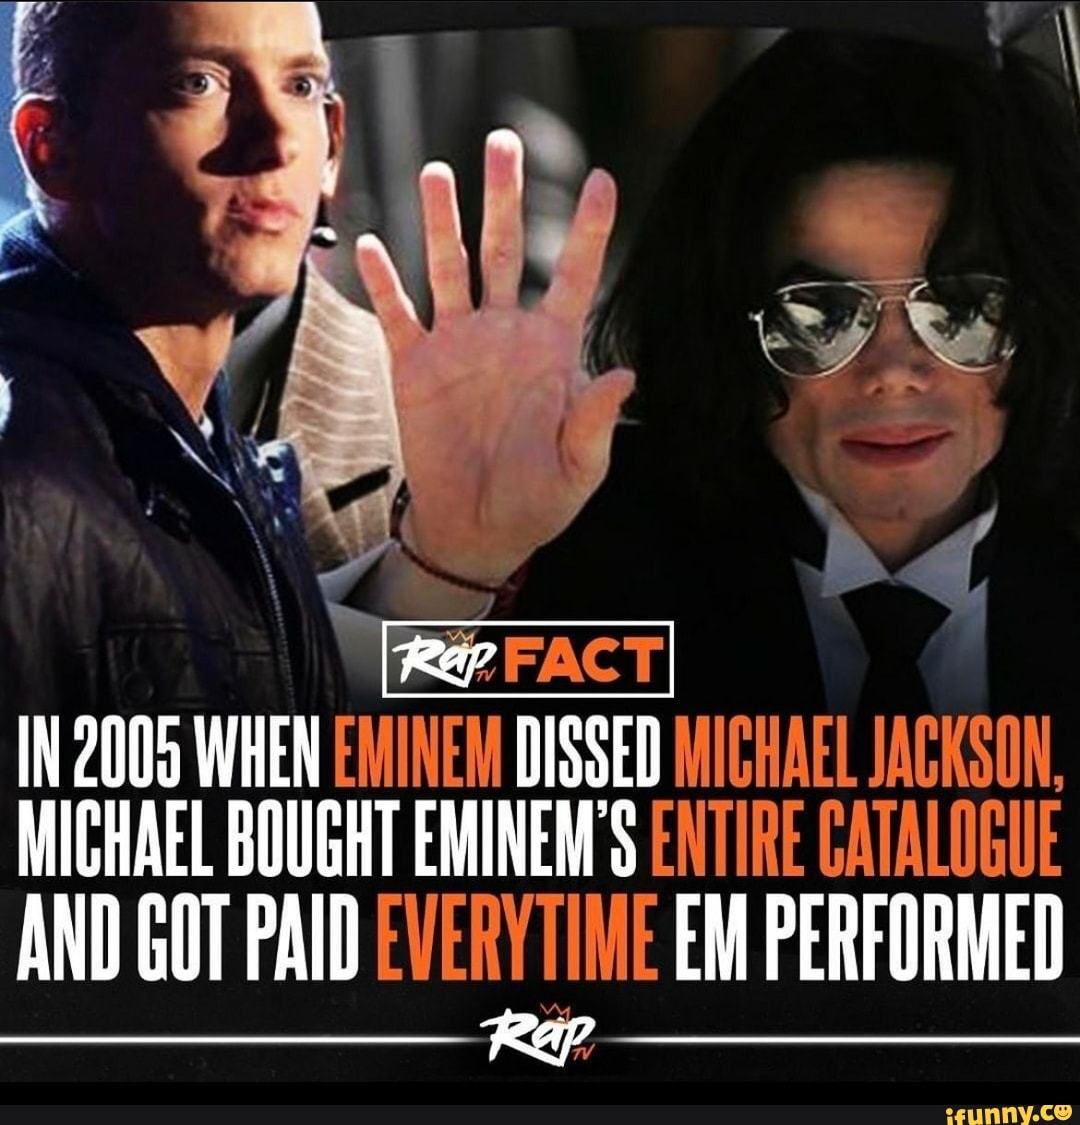 WW stly Se. IN 2005 WHEN EMINEM DISSED MICHAEL JACKSON, MICHAEL BOUGHT  EMINEM'S GATALOGUE AND GOT PAID EM PERFORMED - iFunny Brazil